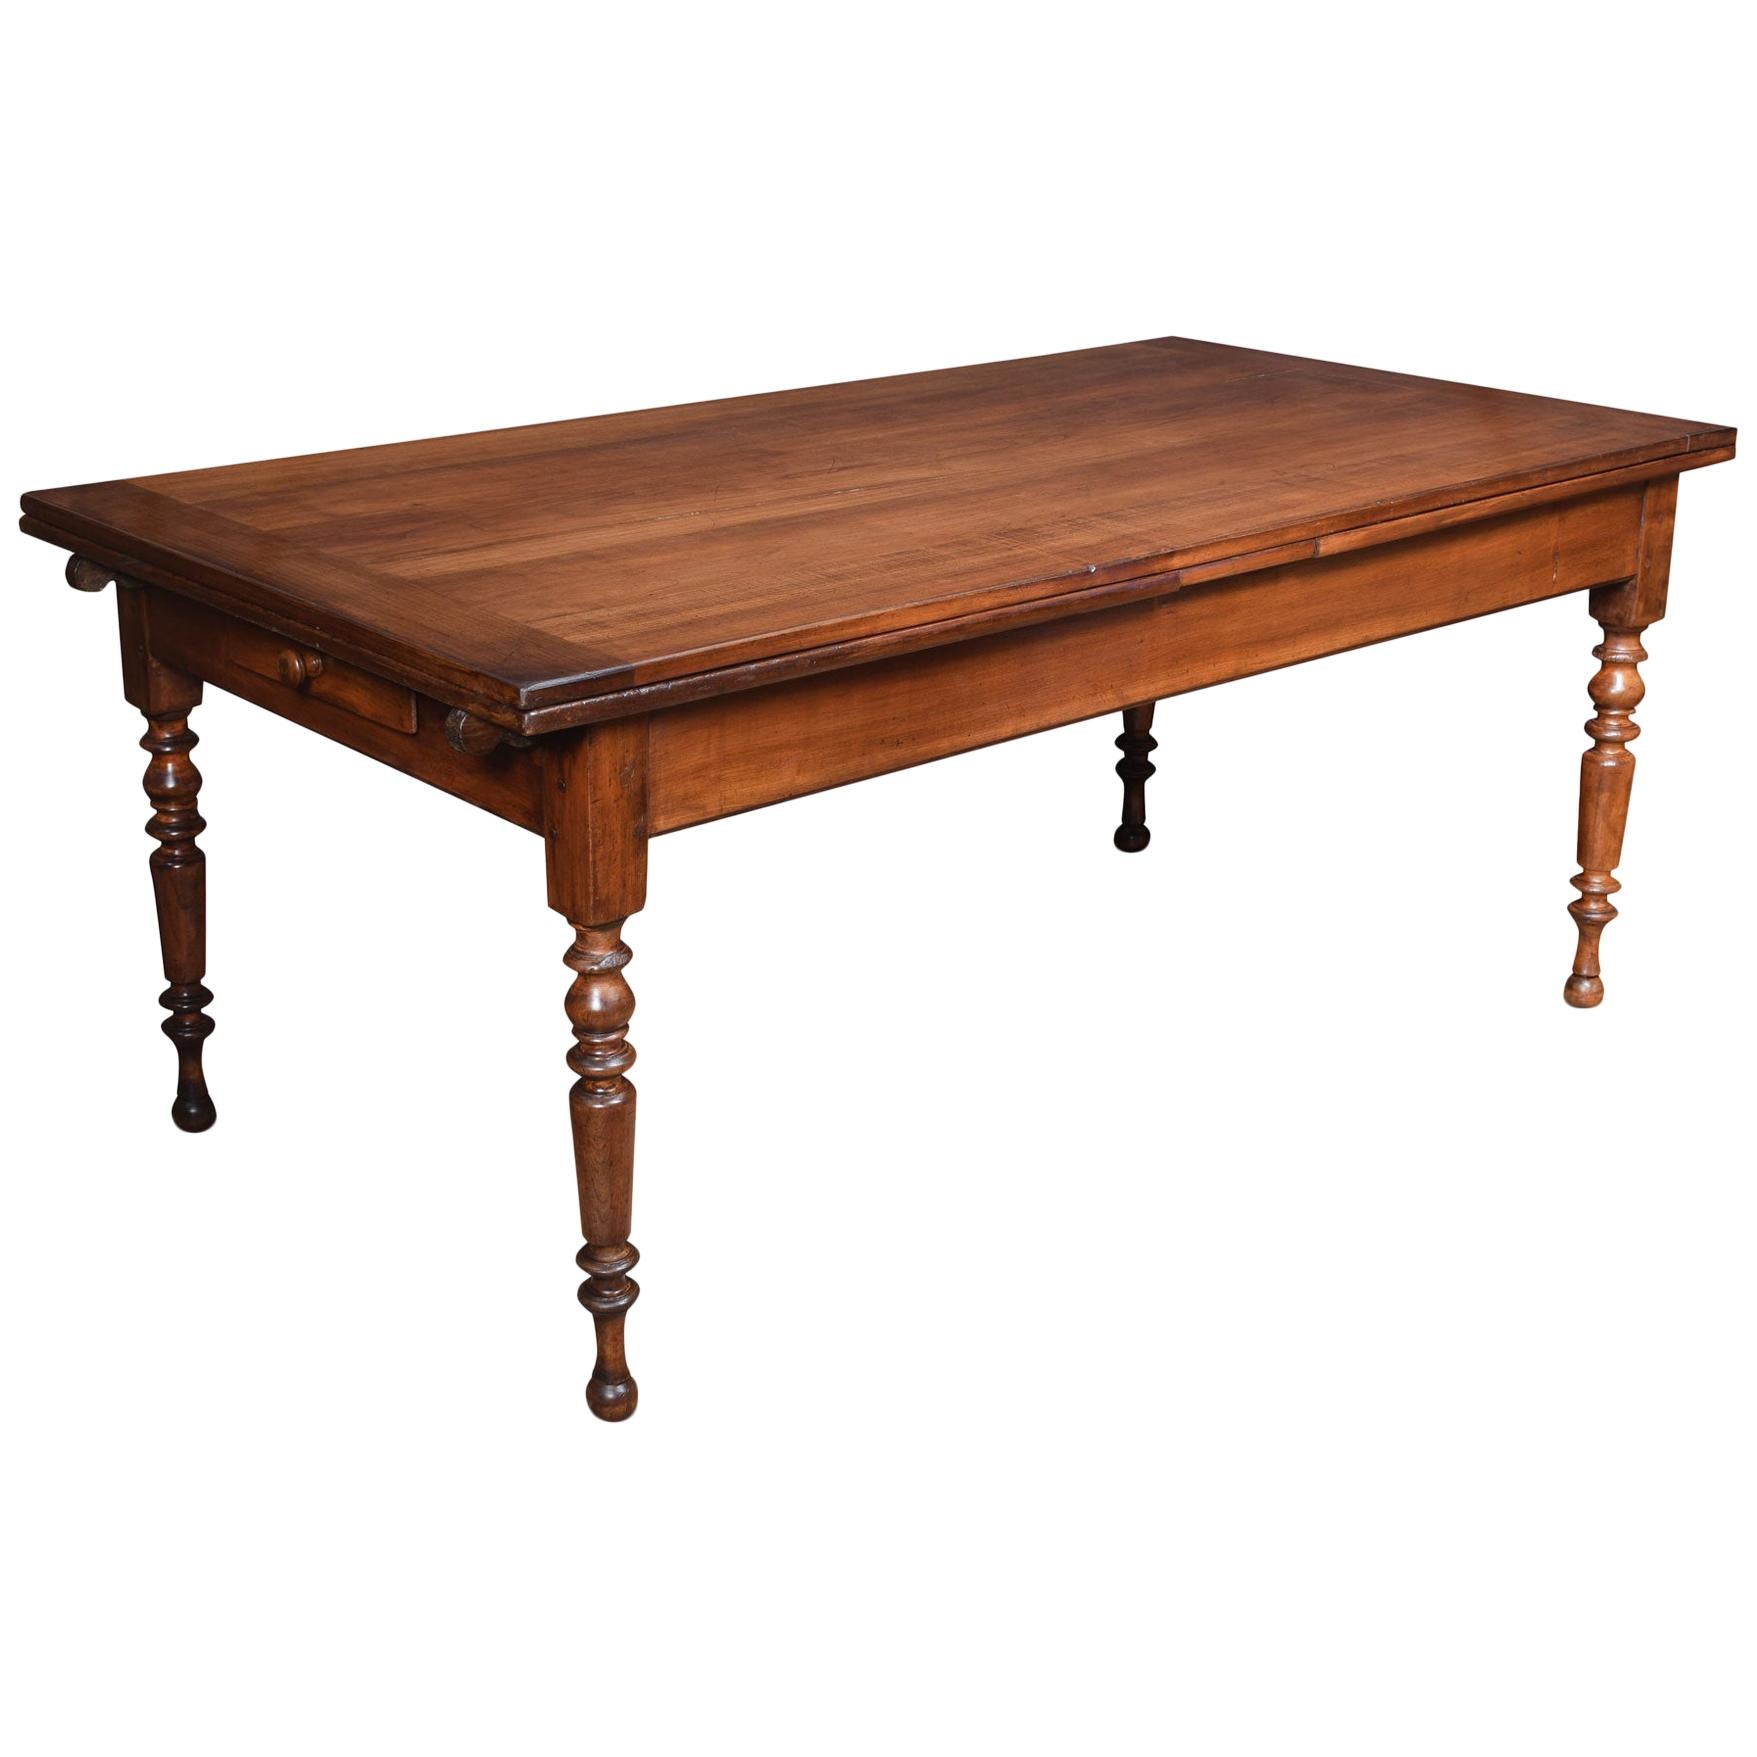 Very Large Country Farmhouse Table